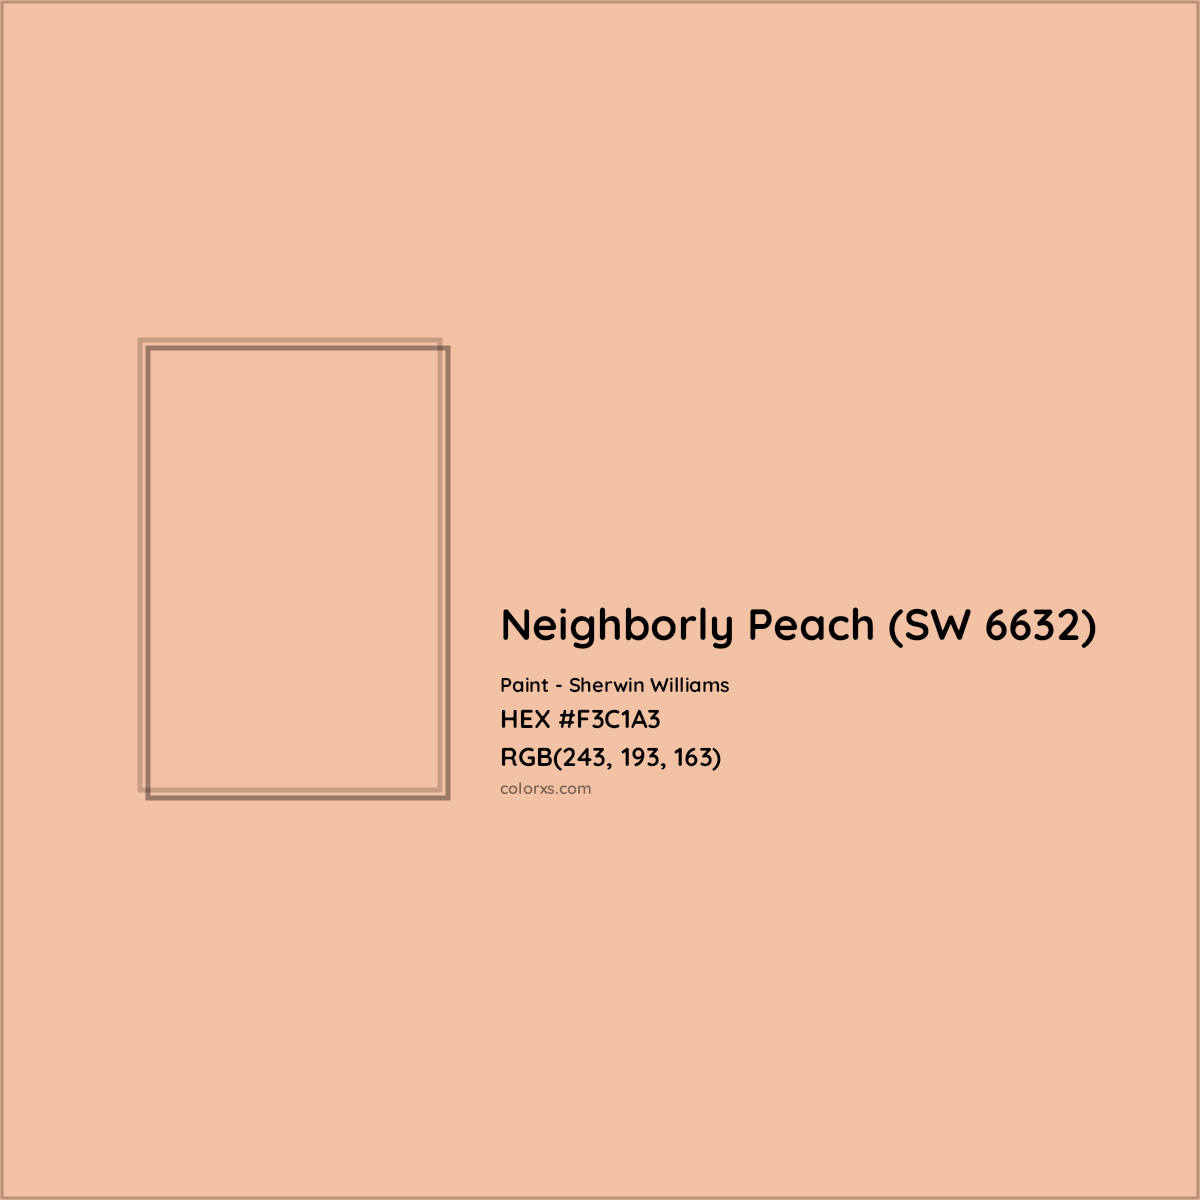 HEX #F3C1A3 Neighborly Peach (SW 6632) Paint Sherwin Williams - Color Code